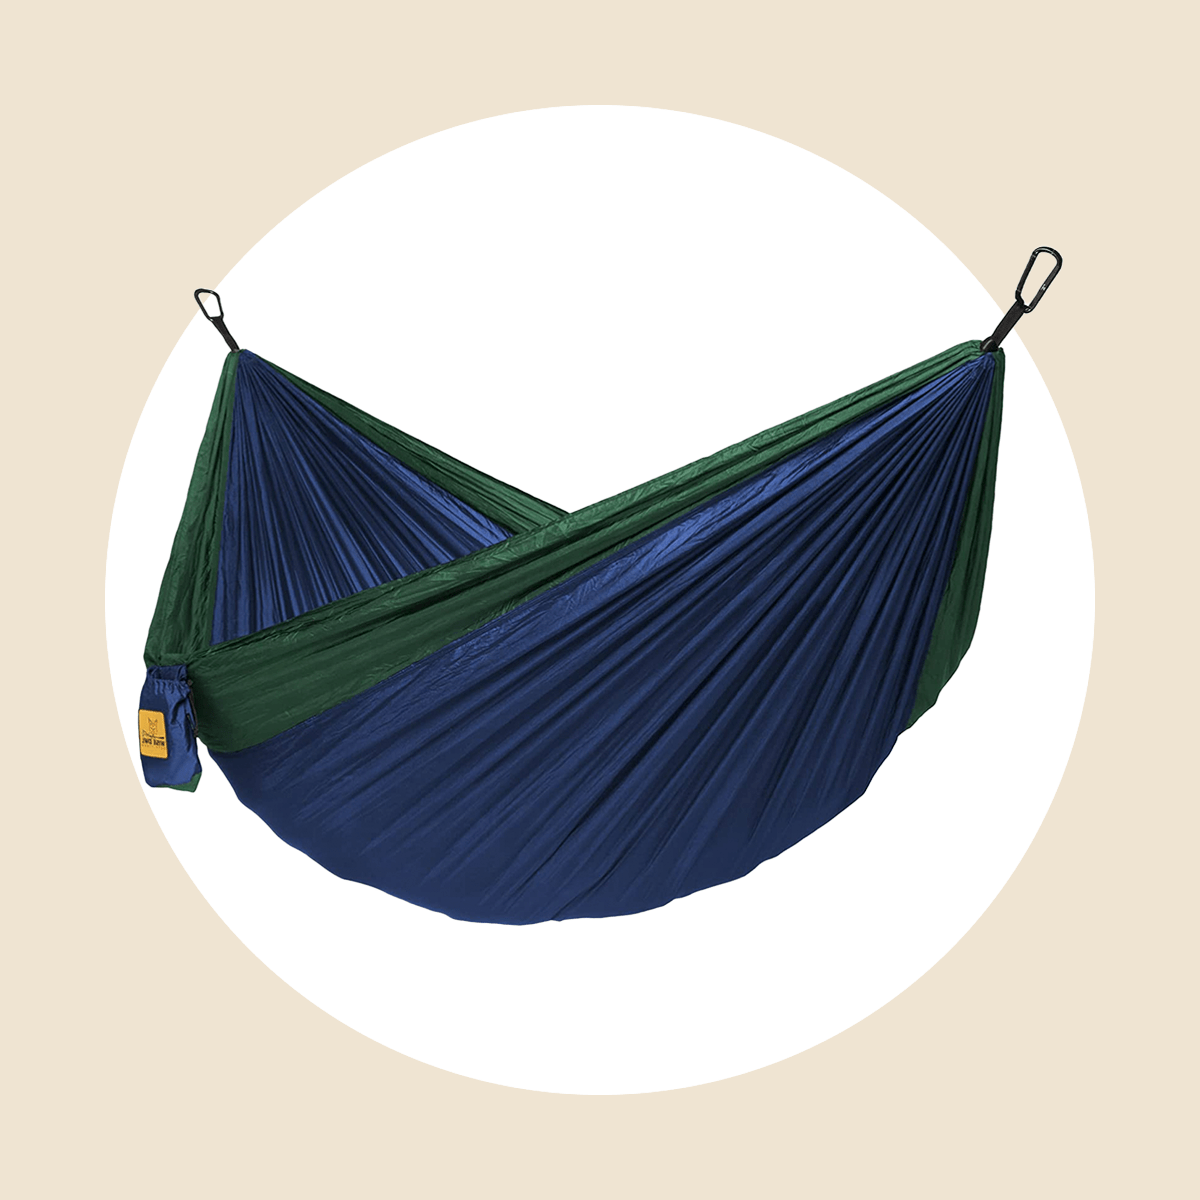 Wise Owl Outfitters Camping Hammock Ecomm Via Amazon